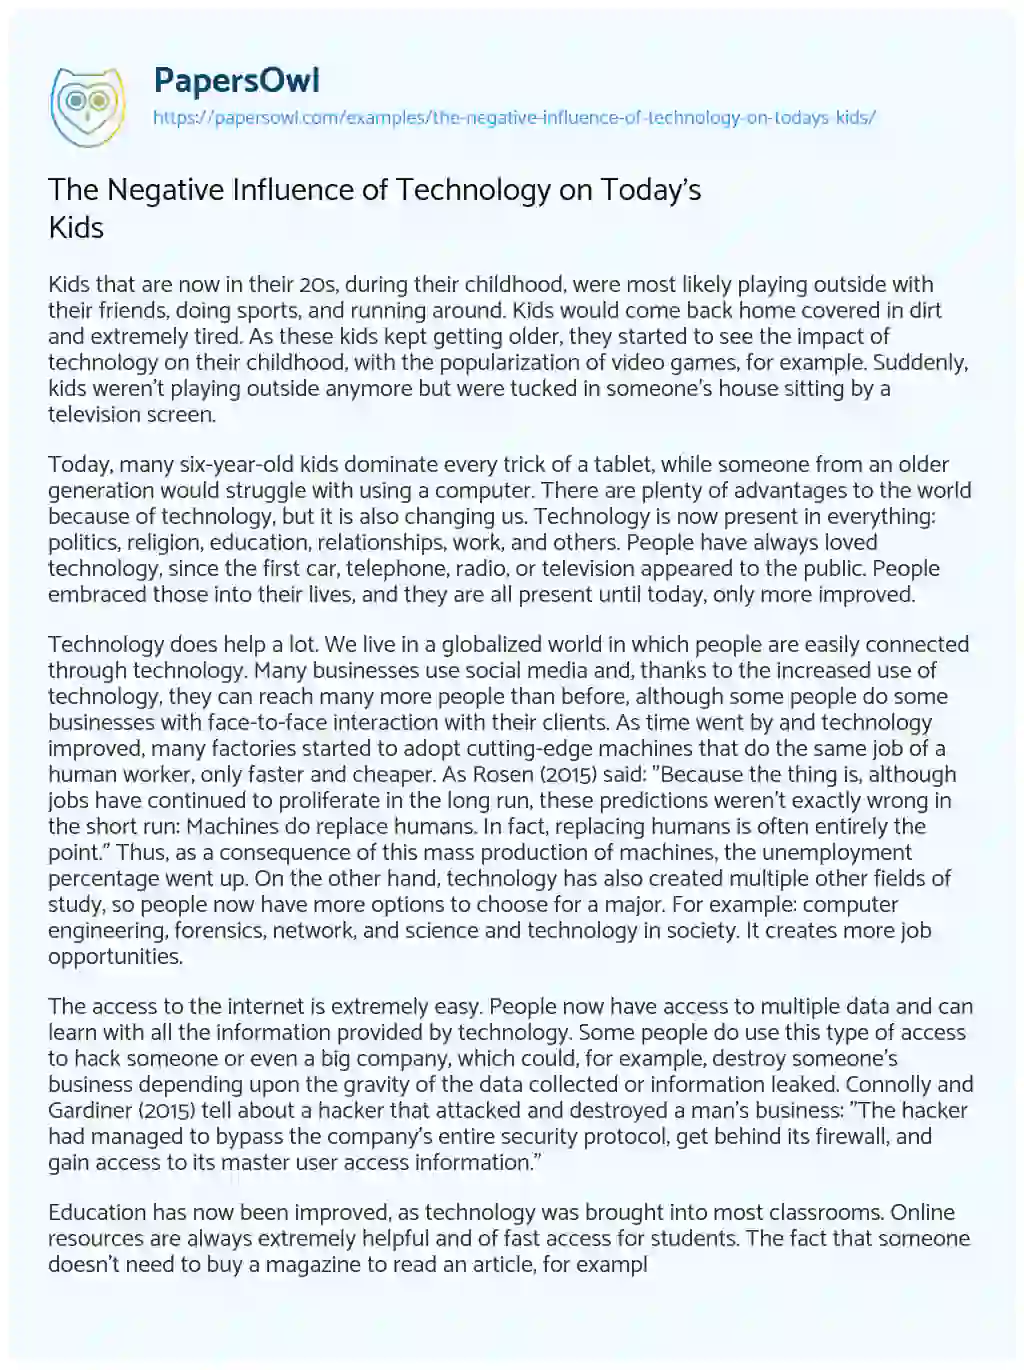 Essay on The Negative Influence of Technology on Today’s Kids